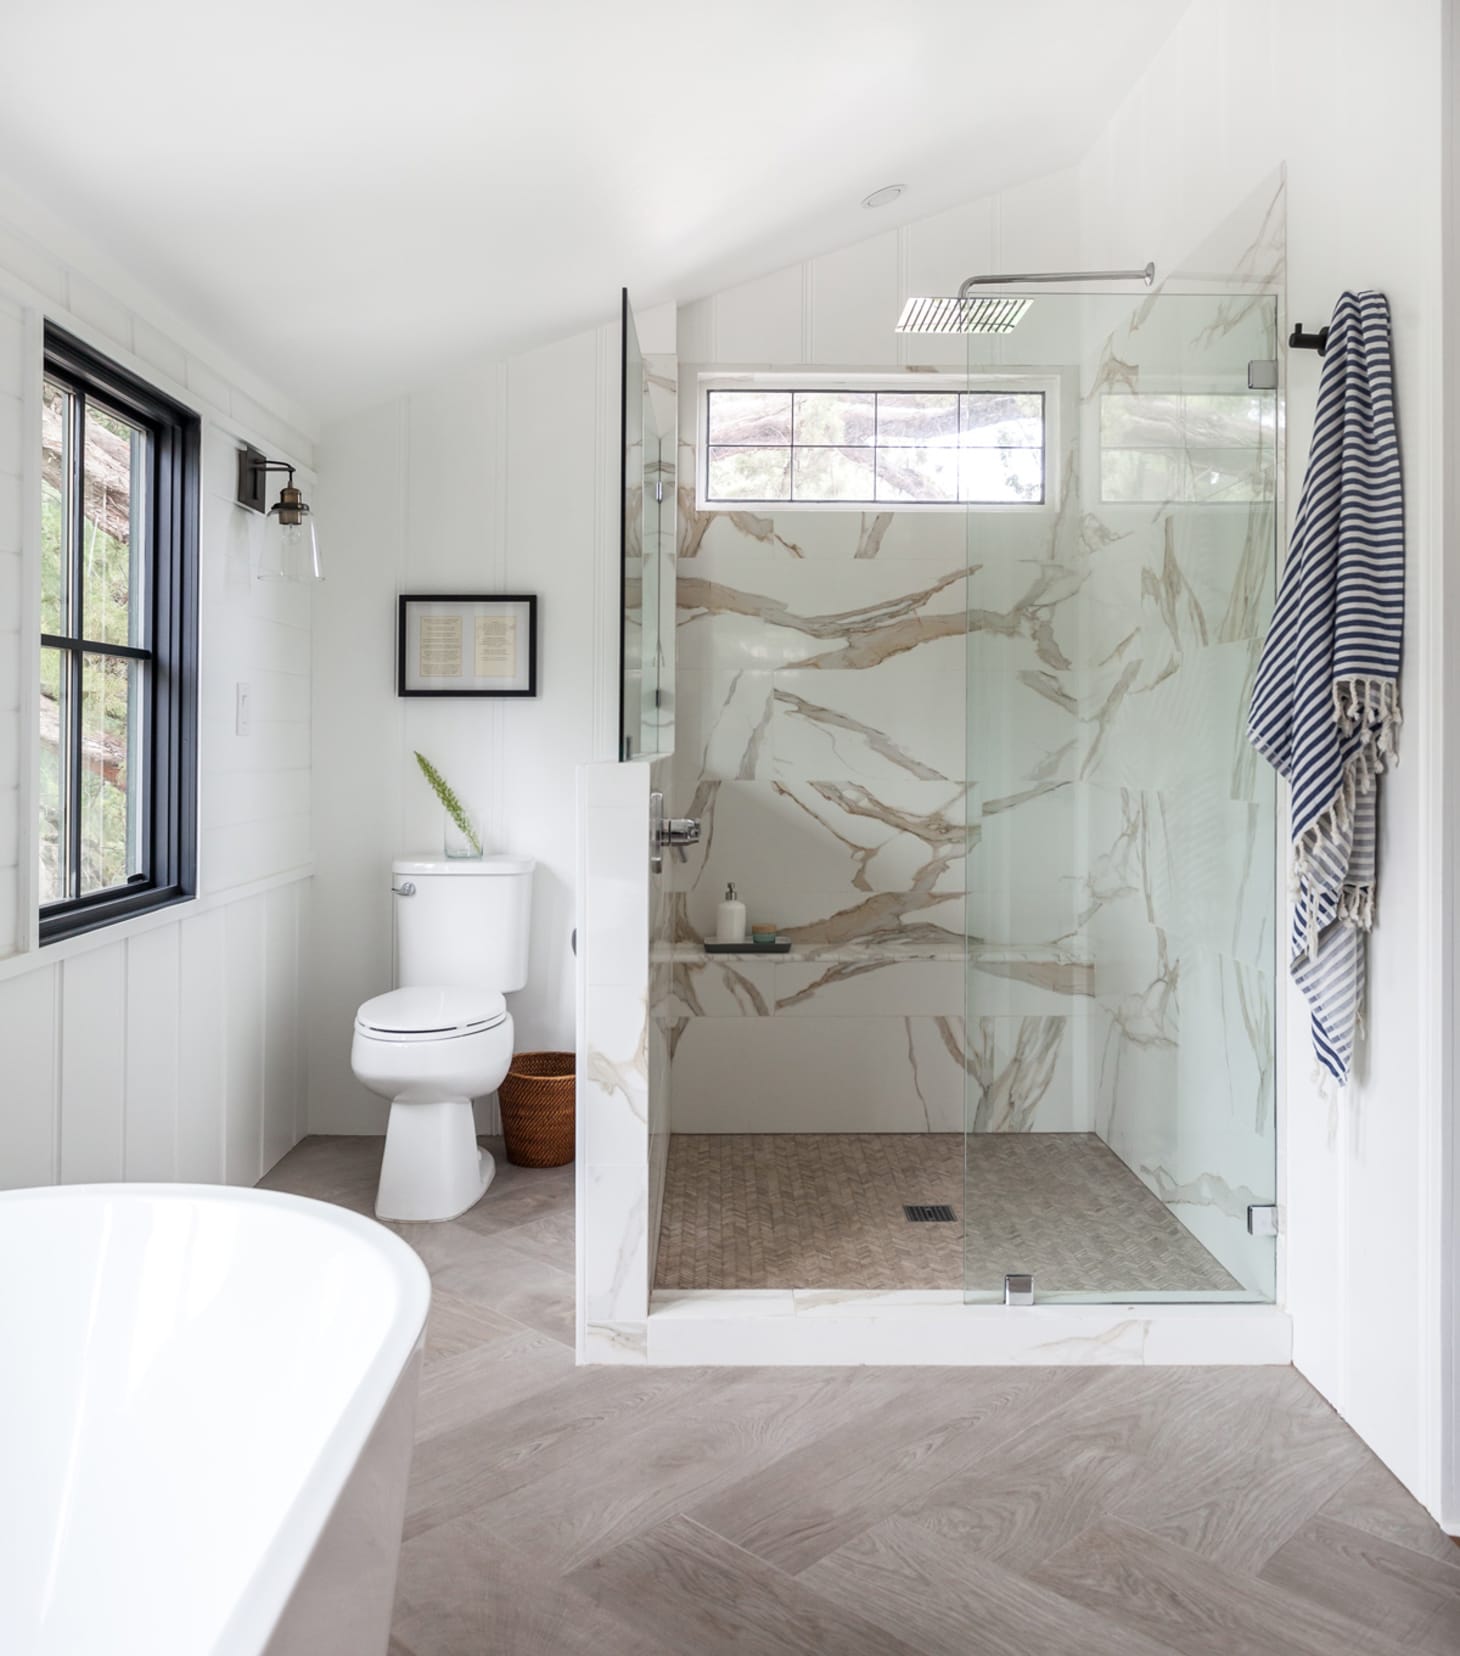 The 2020 Bathroom Design Trends to Know | Apartment Therapy